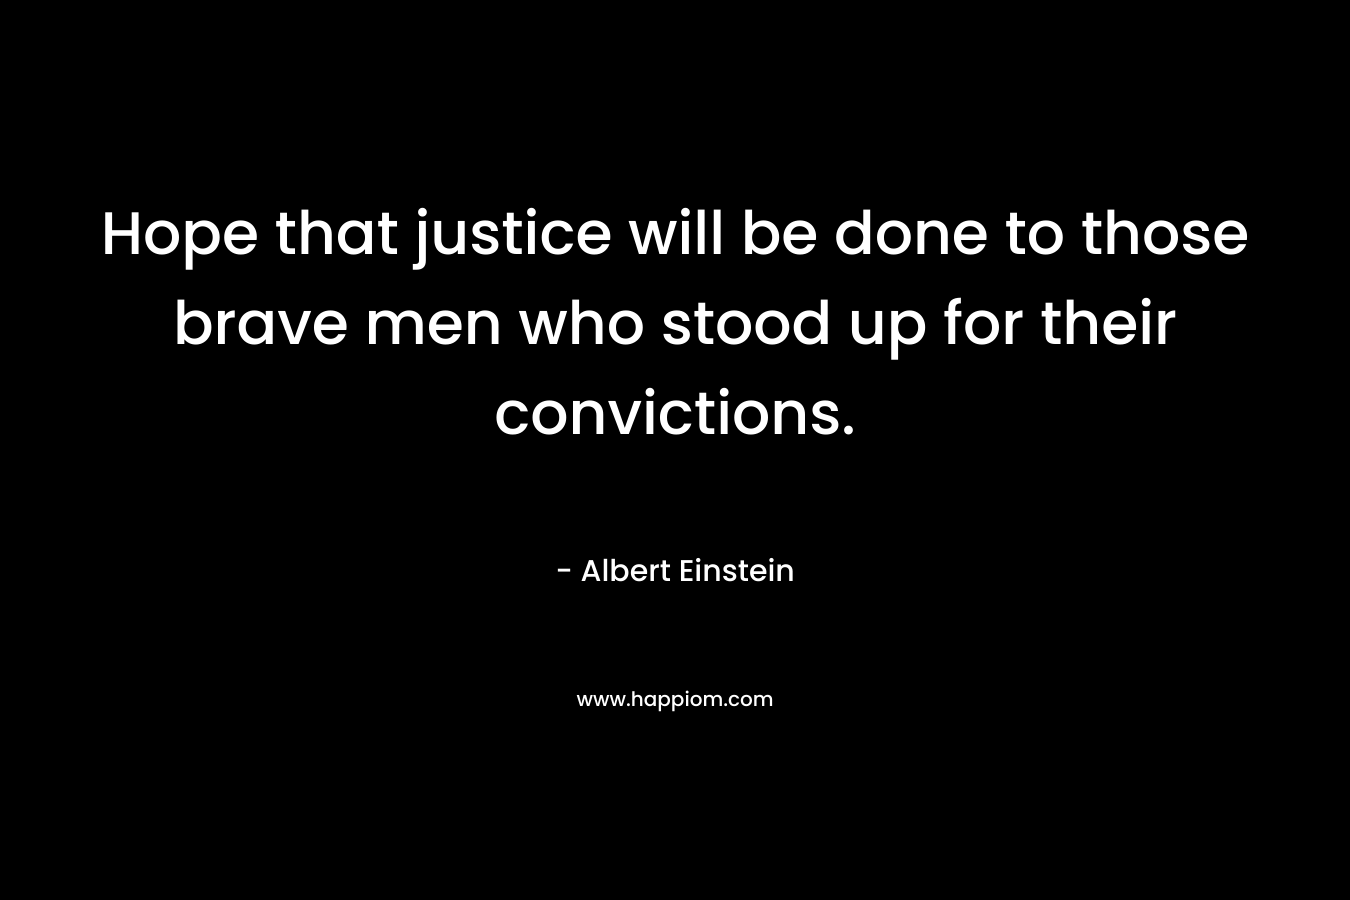 Hope that justice will be done to those brave men who stood up for their convictions.